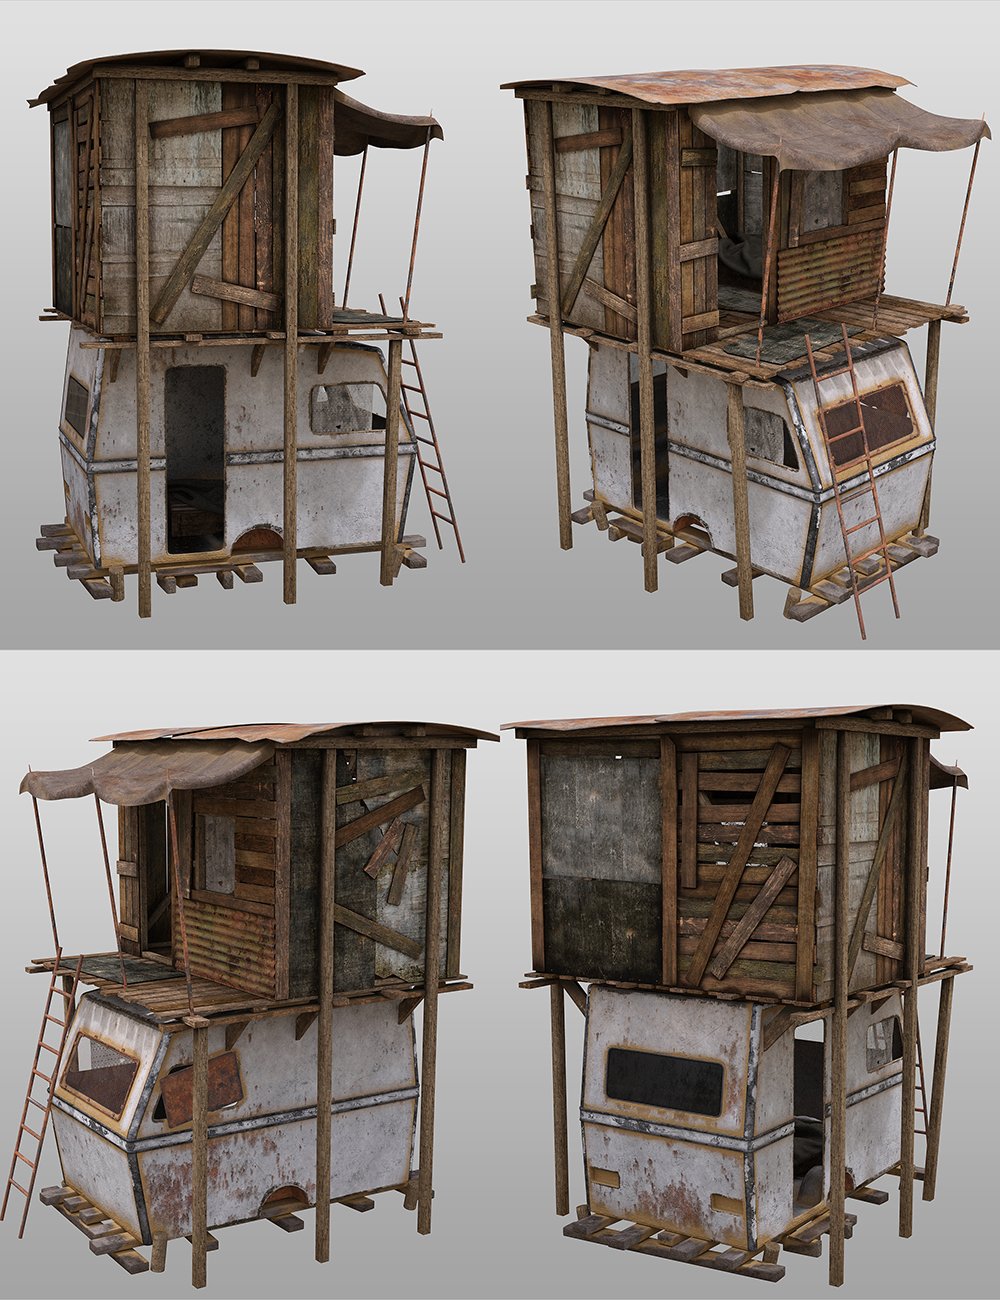 Wasteland Settlement by: Porsimo, 3D Models by Daz 3D